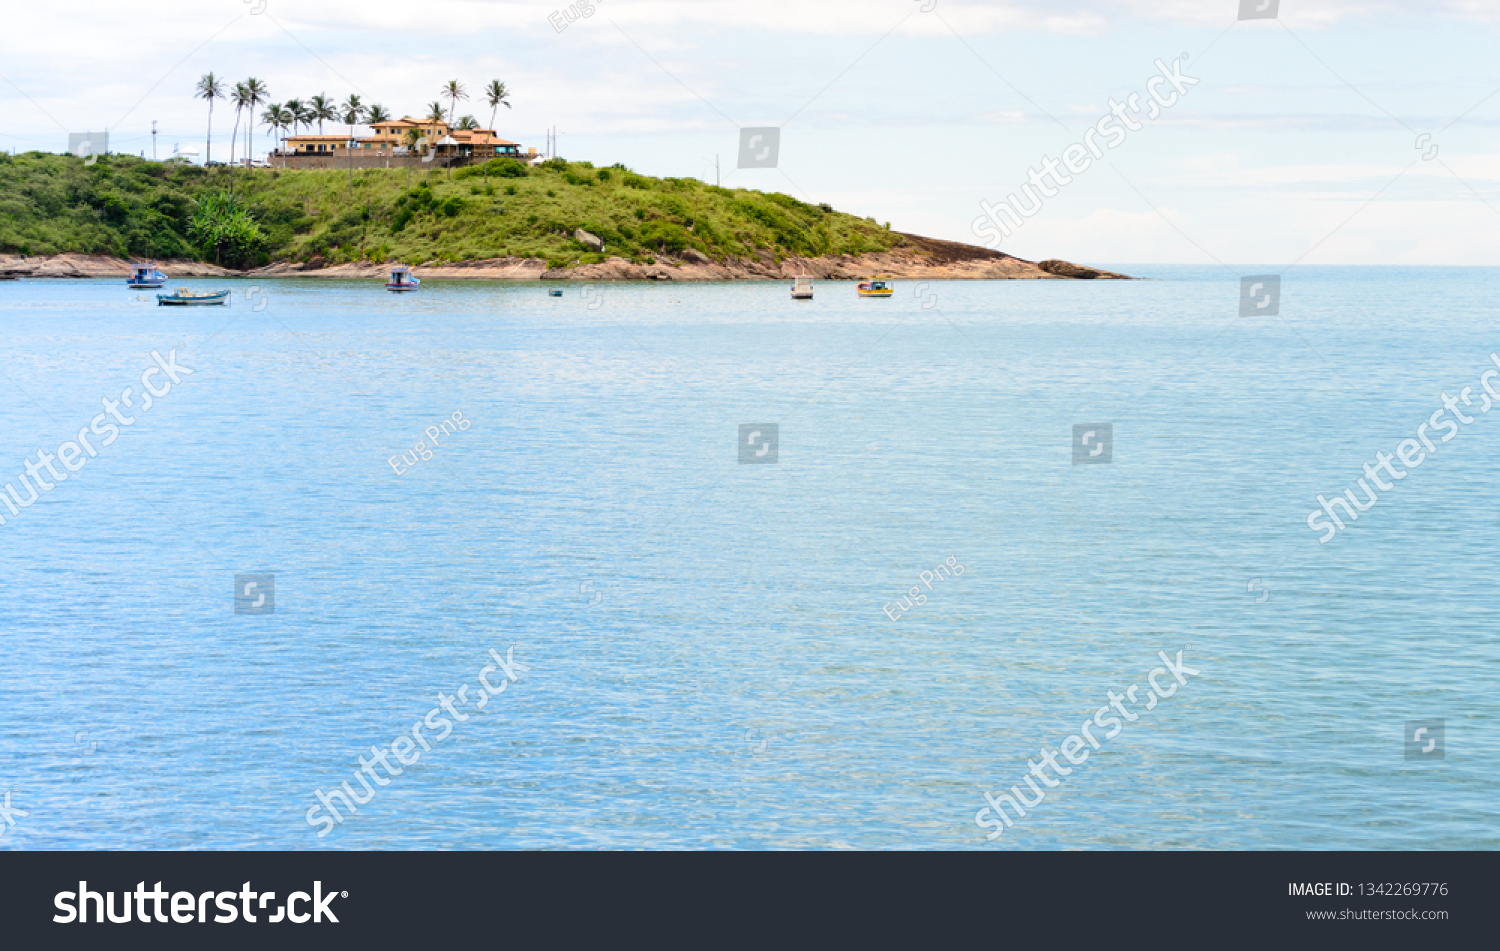 A lovely bay with some little boats and a  sand beach in Meaìpe a small fishing village near Guarapari in the Espirito Santo state in Brazil #1342269776